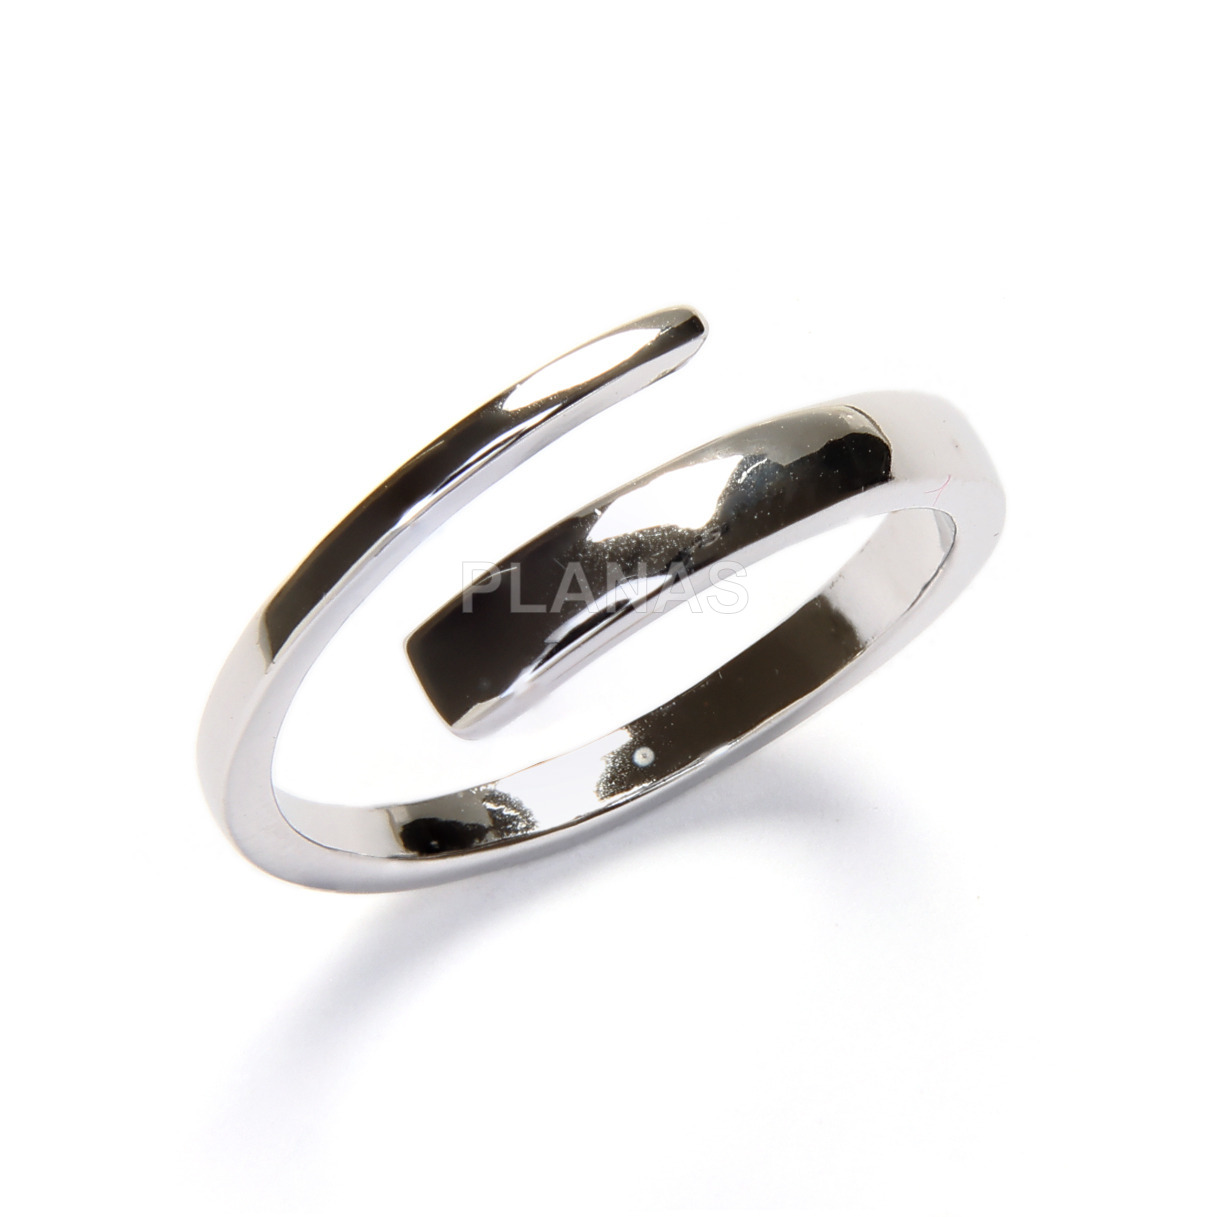 Ring in sterling silver.